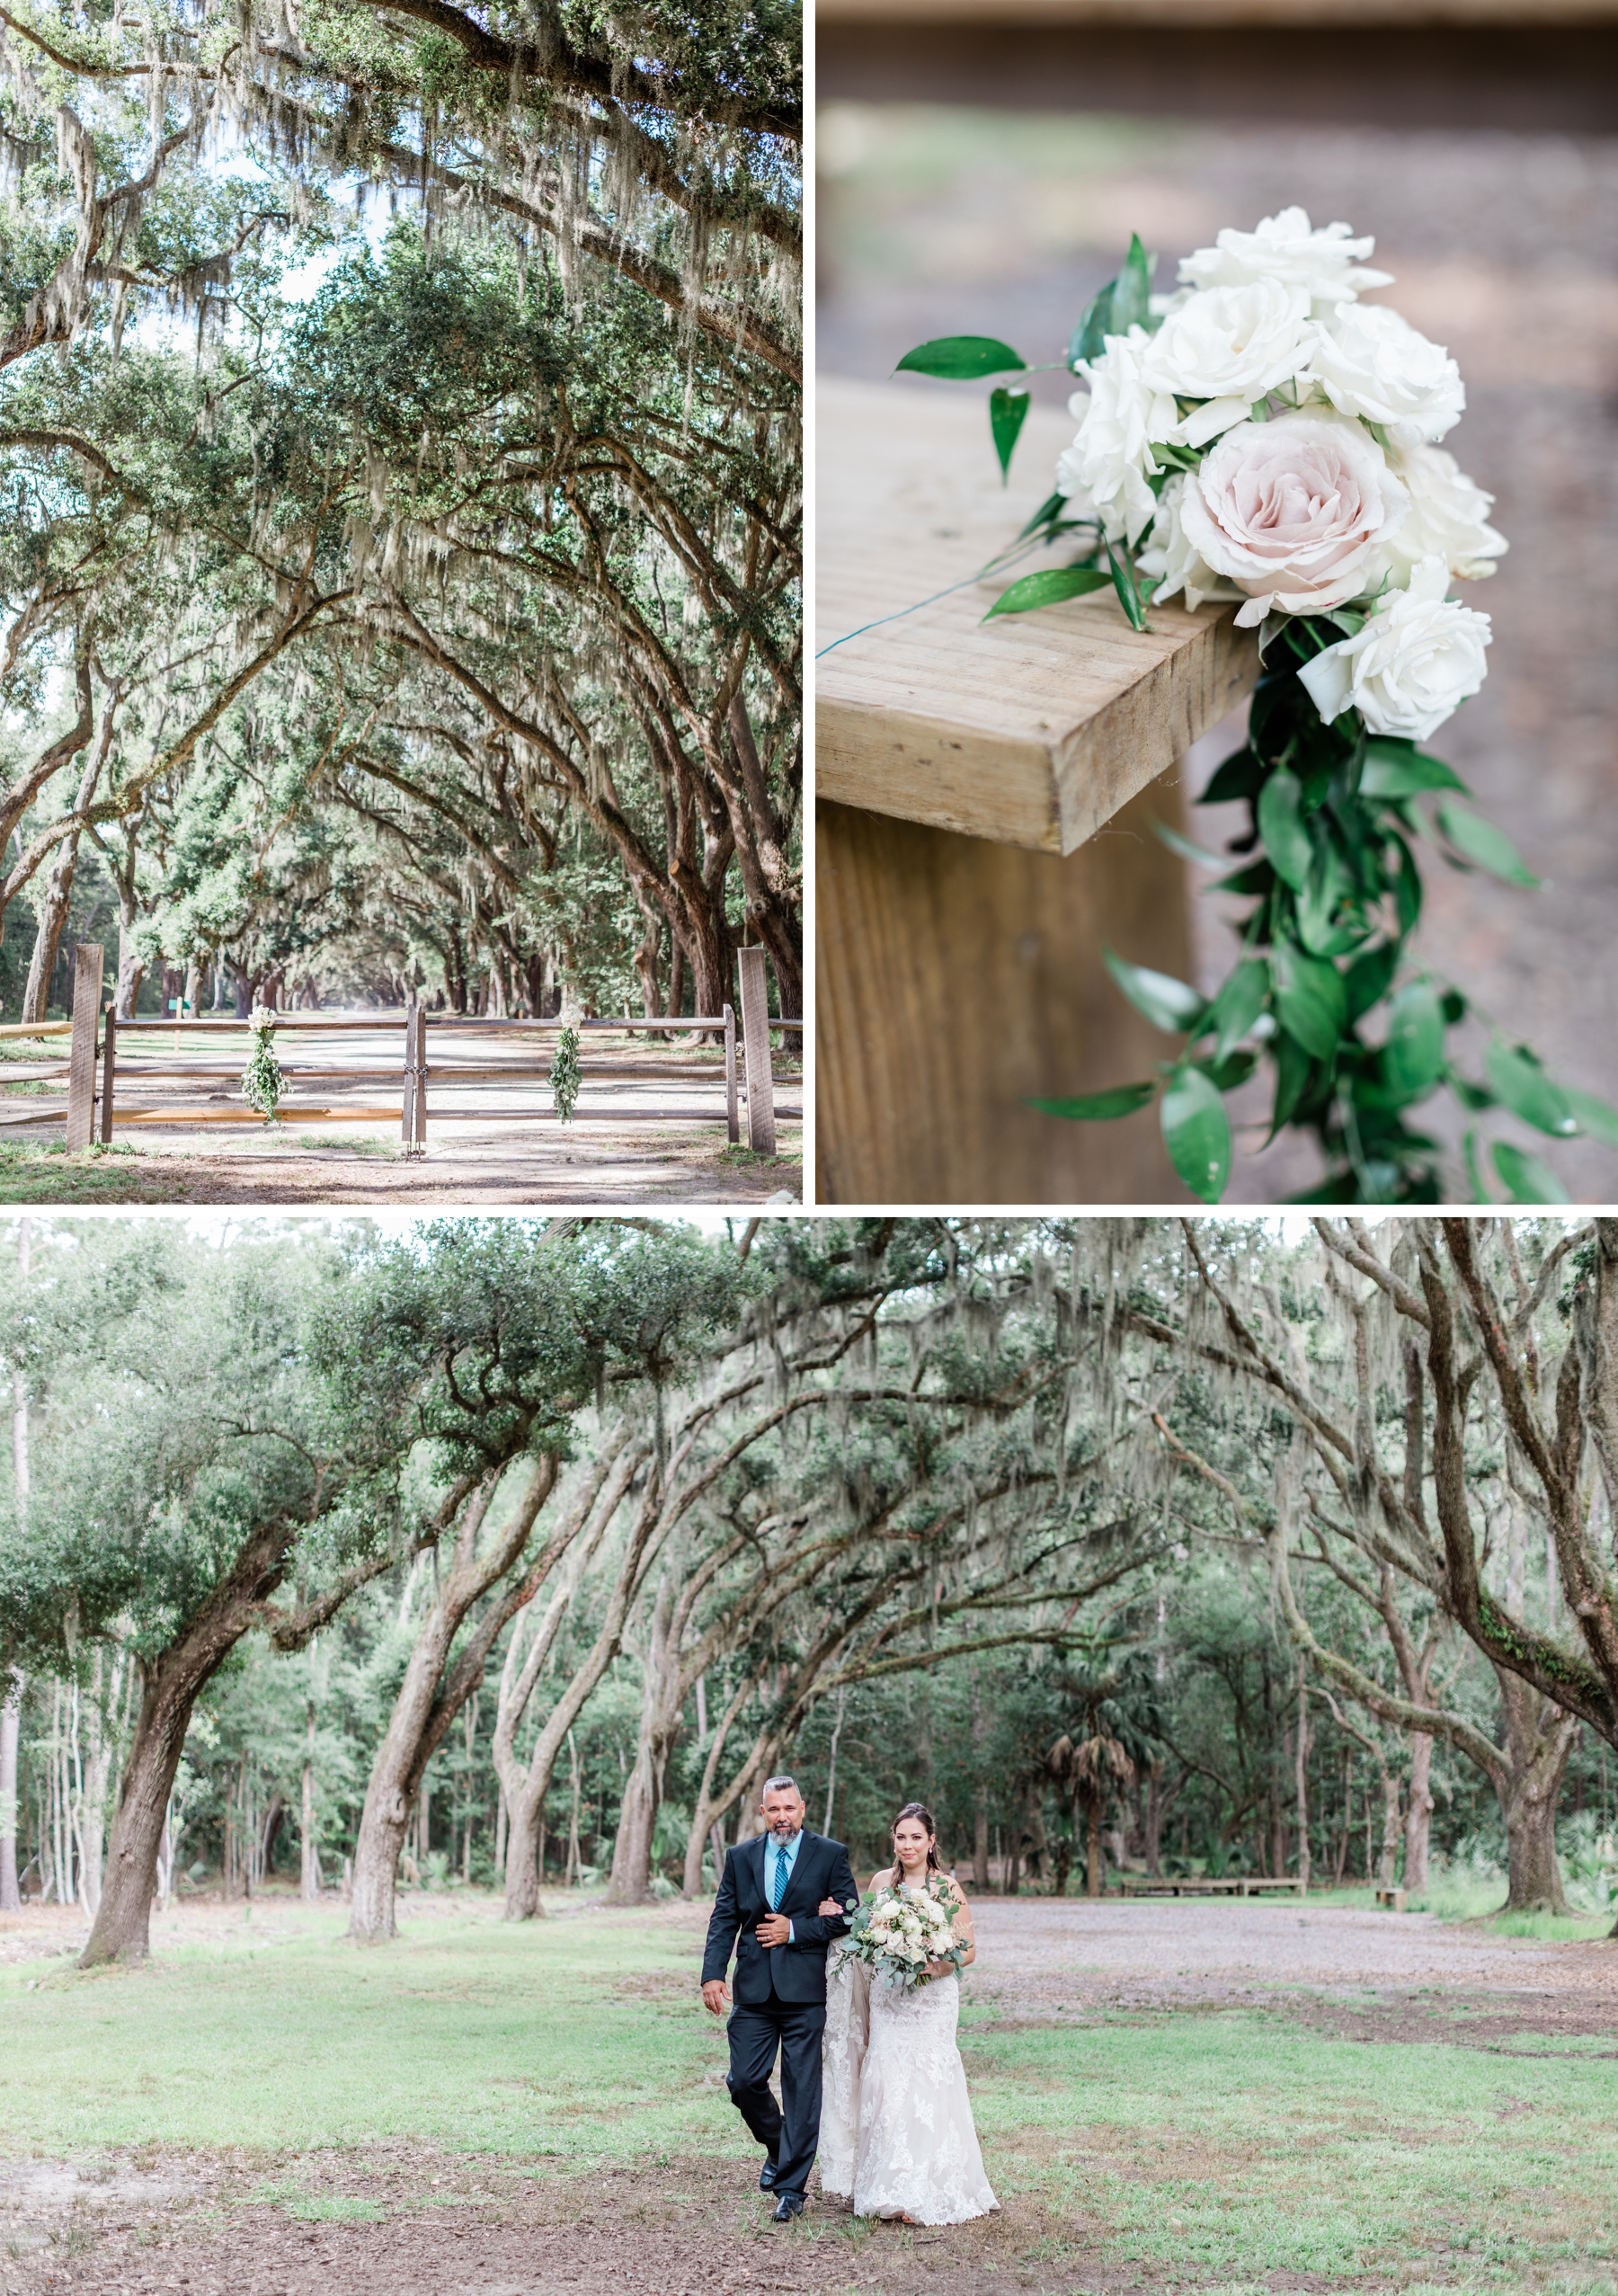 Elopement ceremony at Wormsloe Historic Site in Savannah